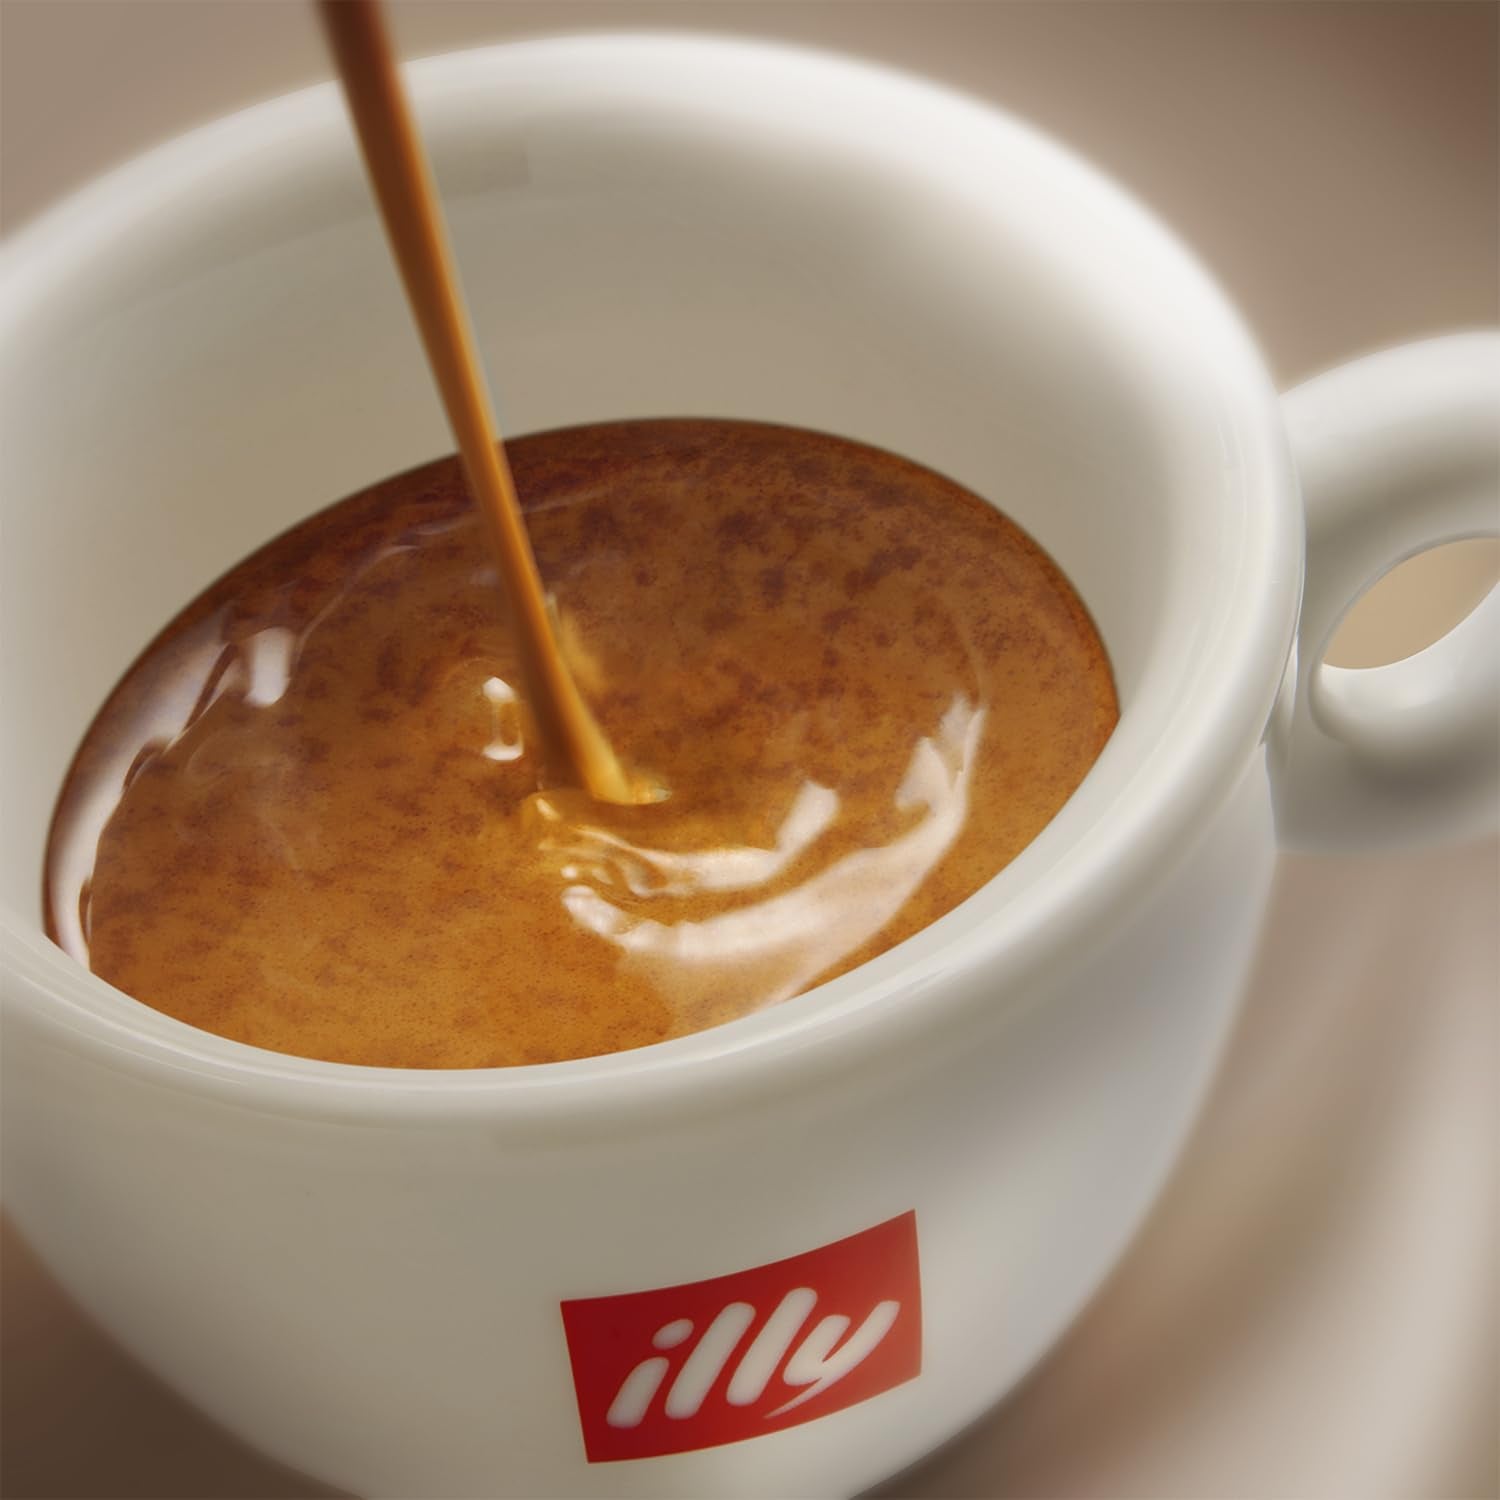 illy Ground Coffee Espresso - 100% Arabica Coffee Ground – Classico Decaf Roast - Notes of Caramel, Toasted Bread & Chocolate - Rich Aromatic Profile - Precise Roast - No Preservatives – 8.8 Ounce : Illy Decaf Espresso : Everything Else